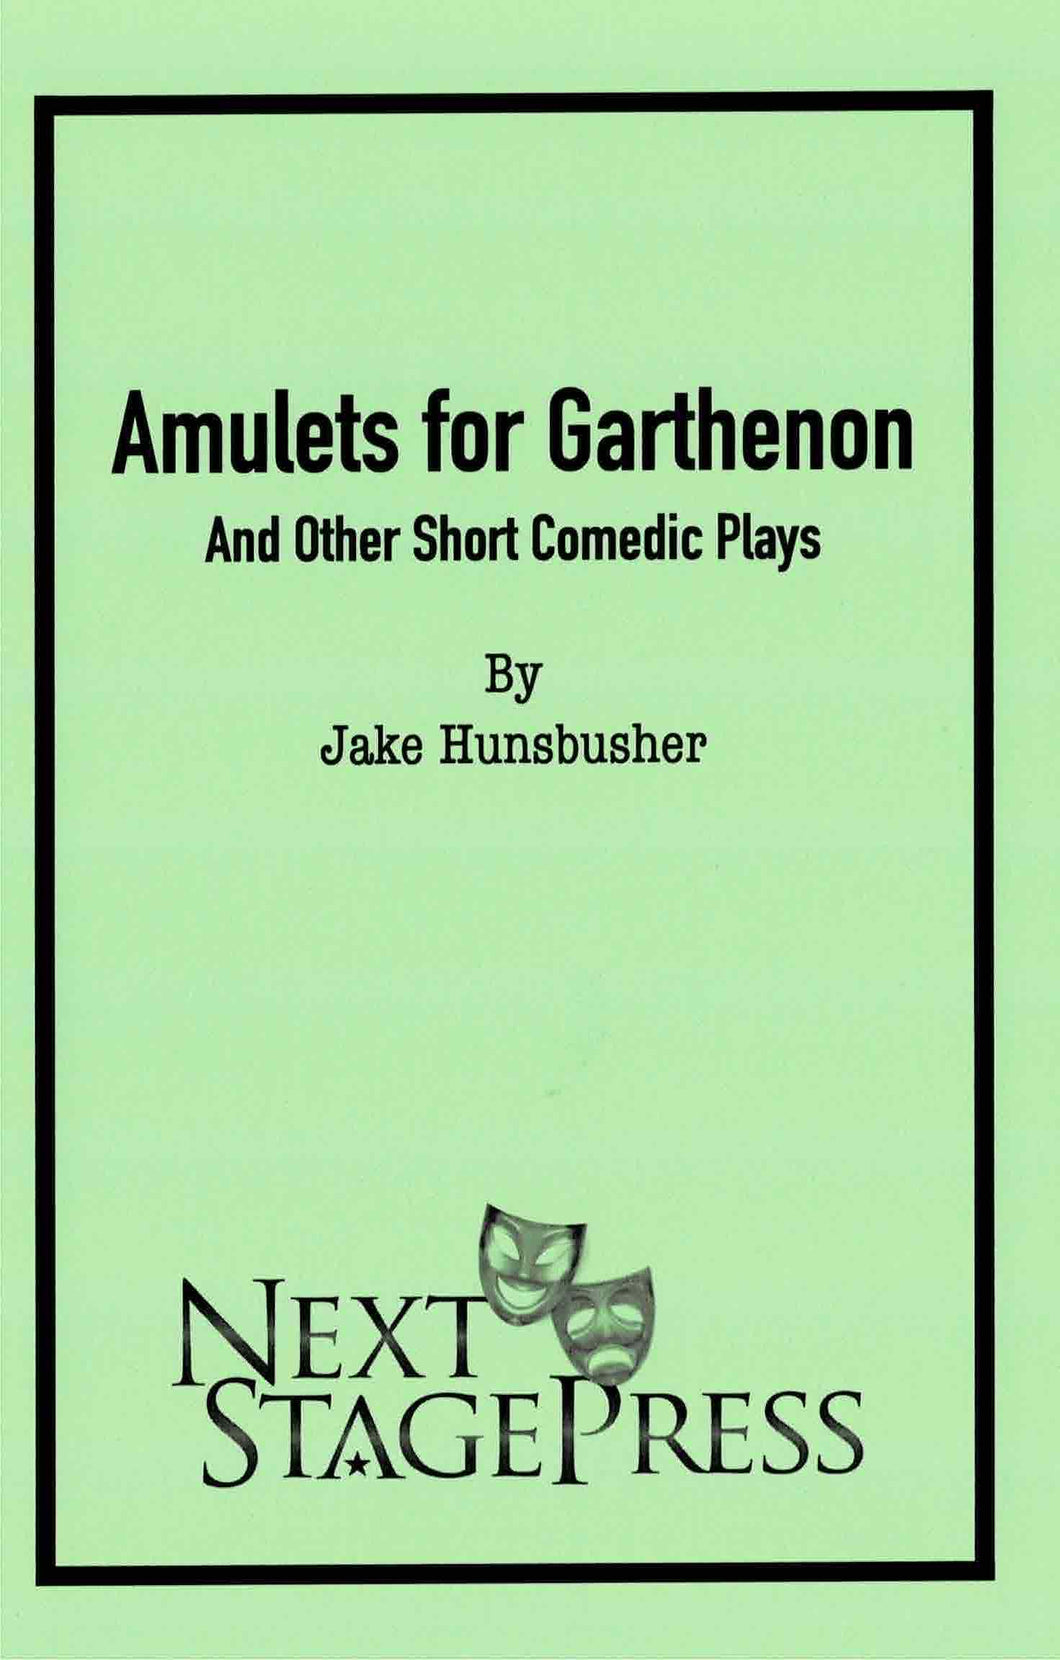 Amulets for Garthenon and Other Short Comedic Plays